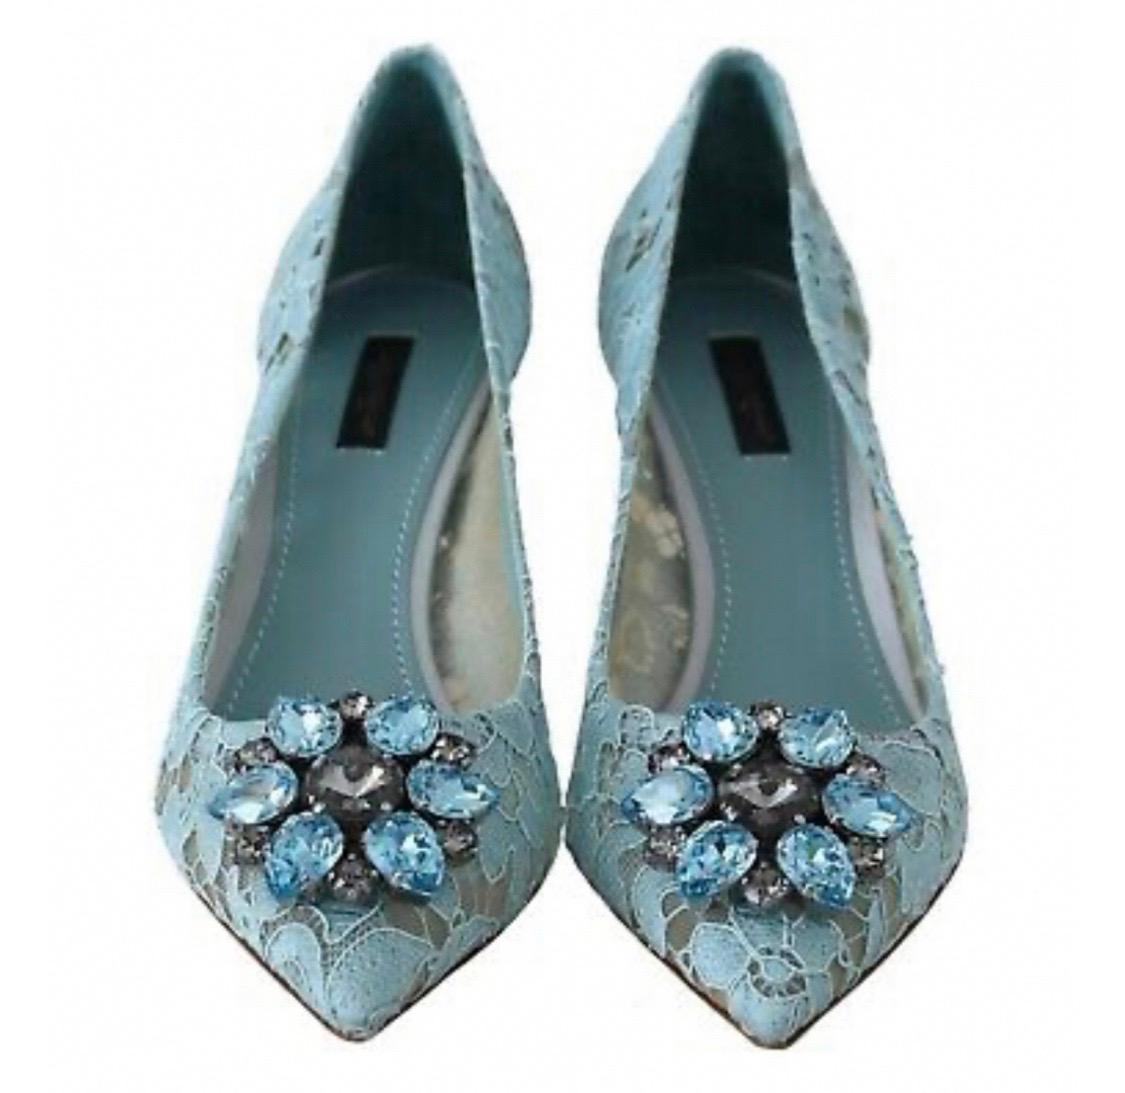 Dolce & Gabbana blue  PUMP lace
shoes with jewel detail on the top heels  1